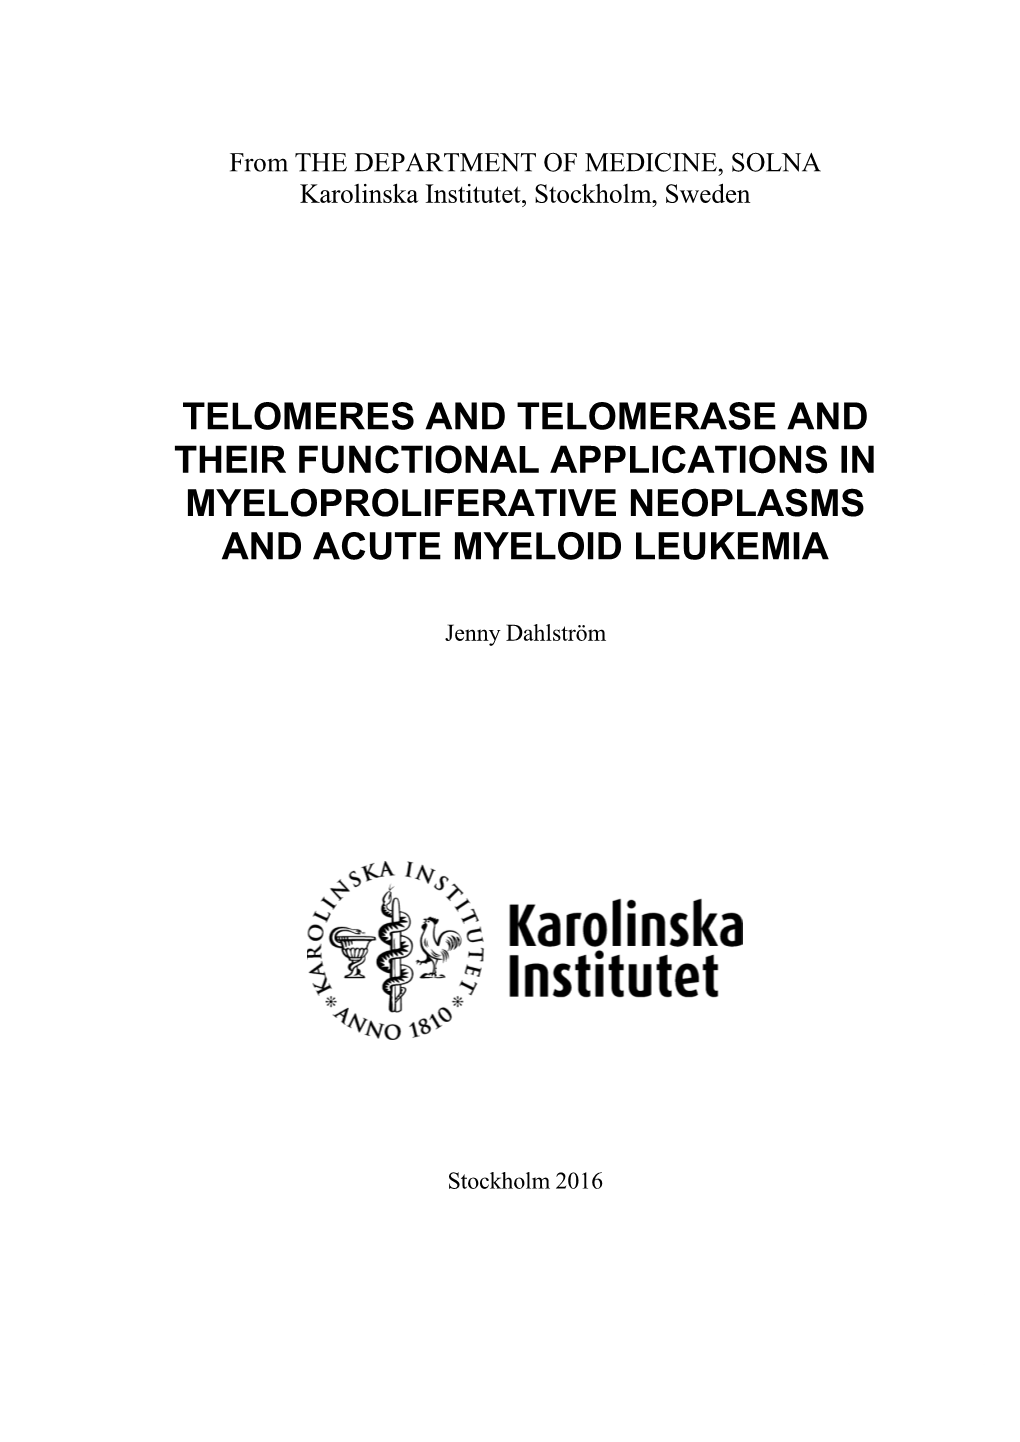 Telomeres and Telomerase and Their Functional Applications in Myeloproliferative Neoplasms and Acute Myeloid Leukemia